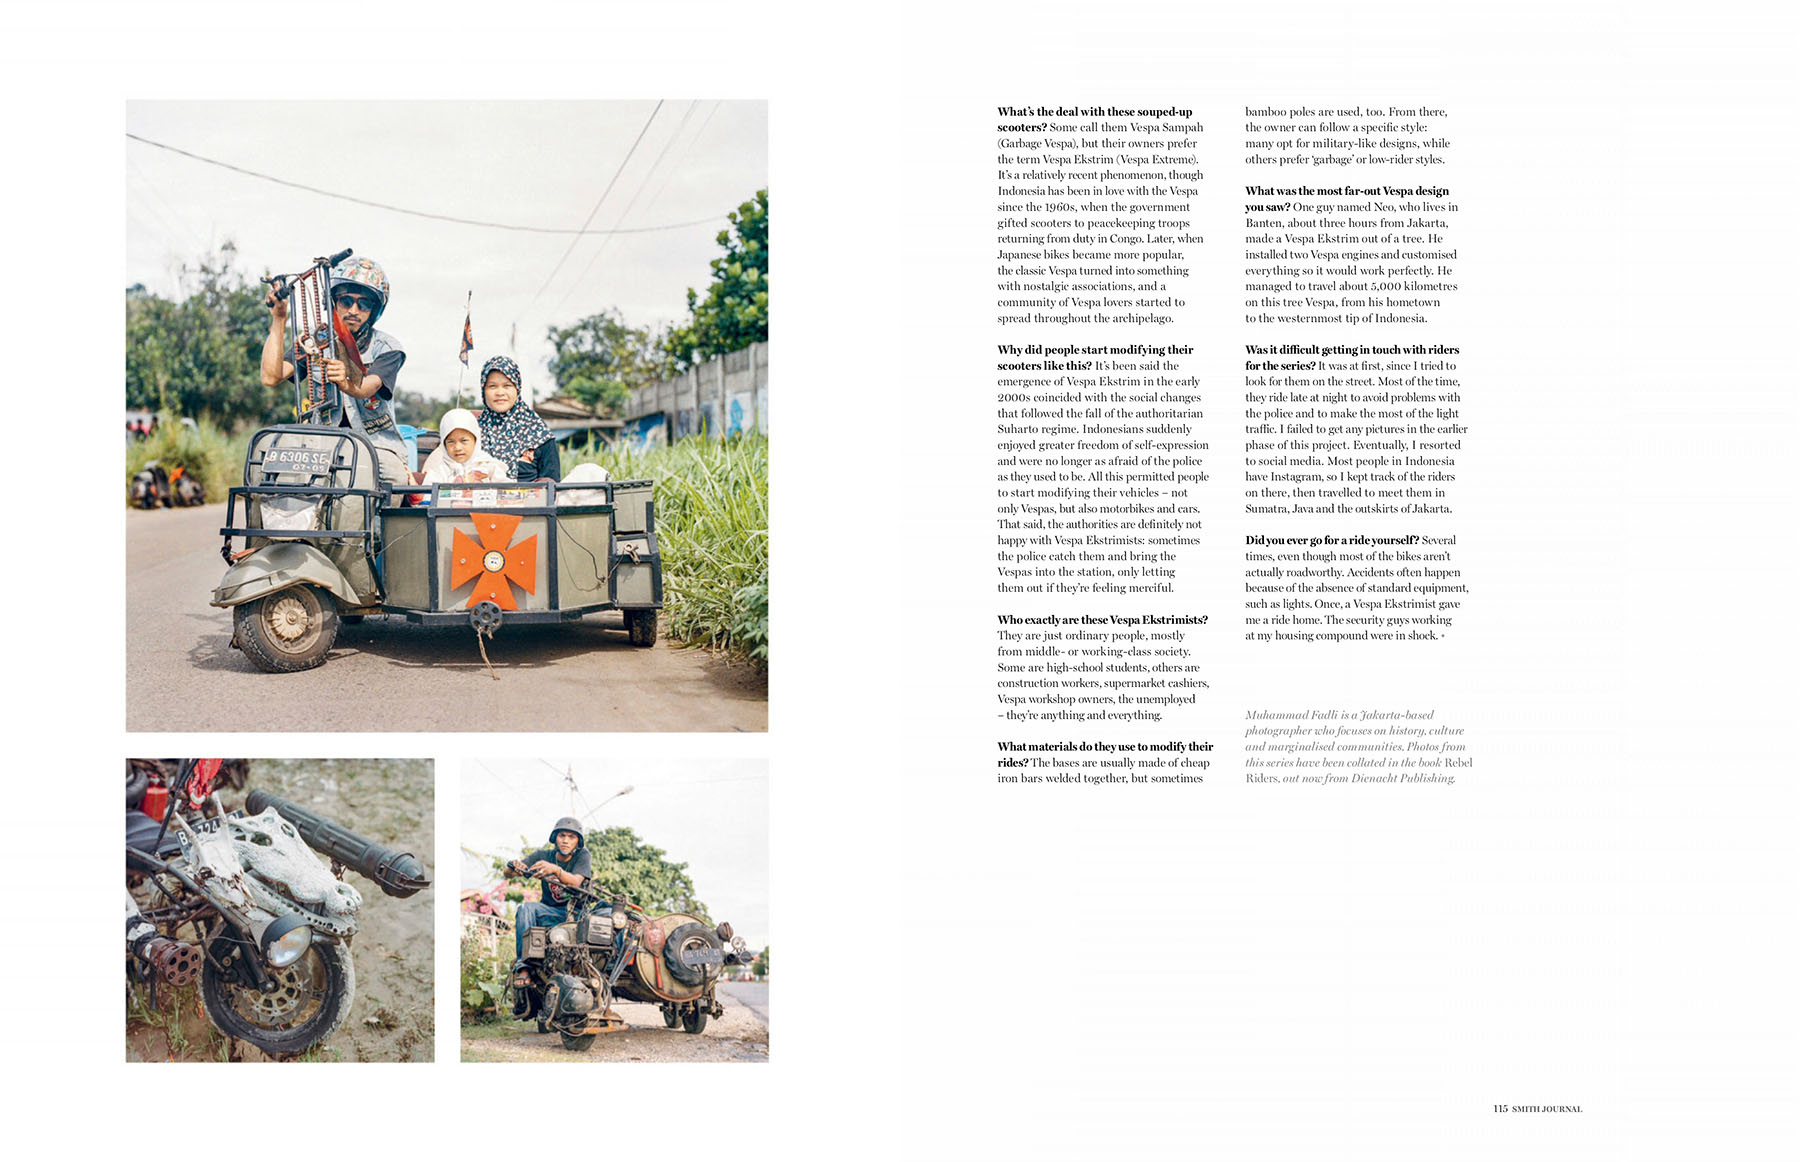  Rebel Riders in Smith Journal vol.30, March 2019 